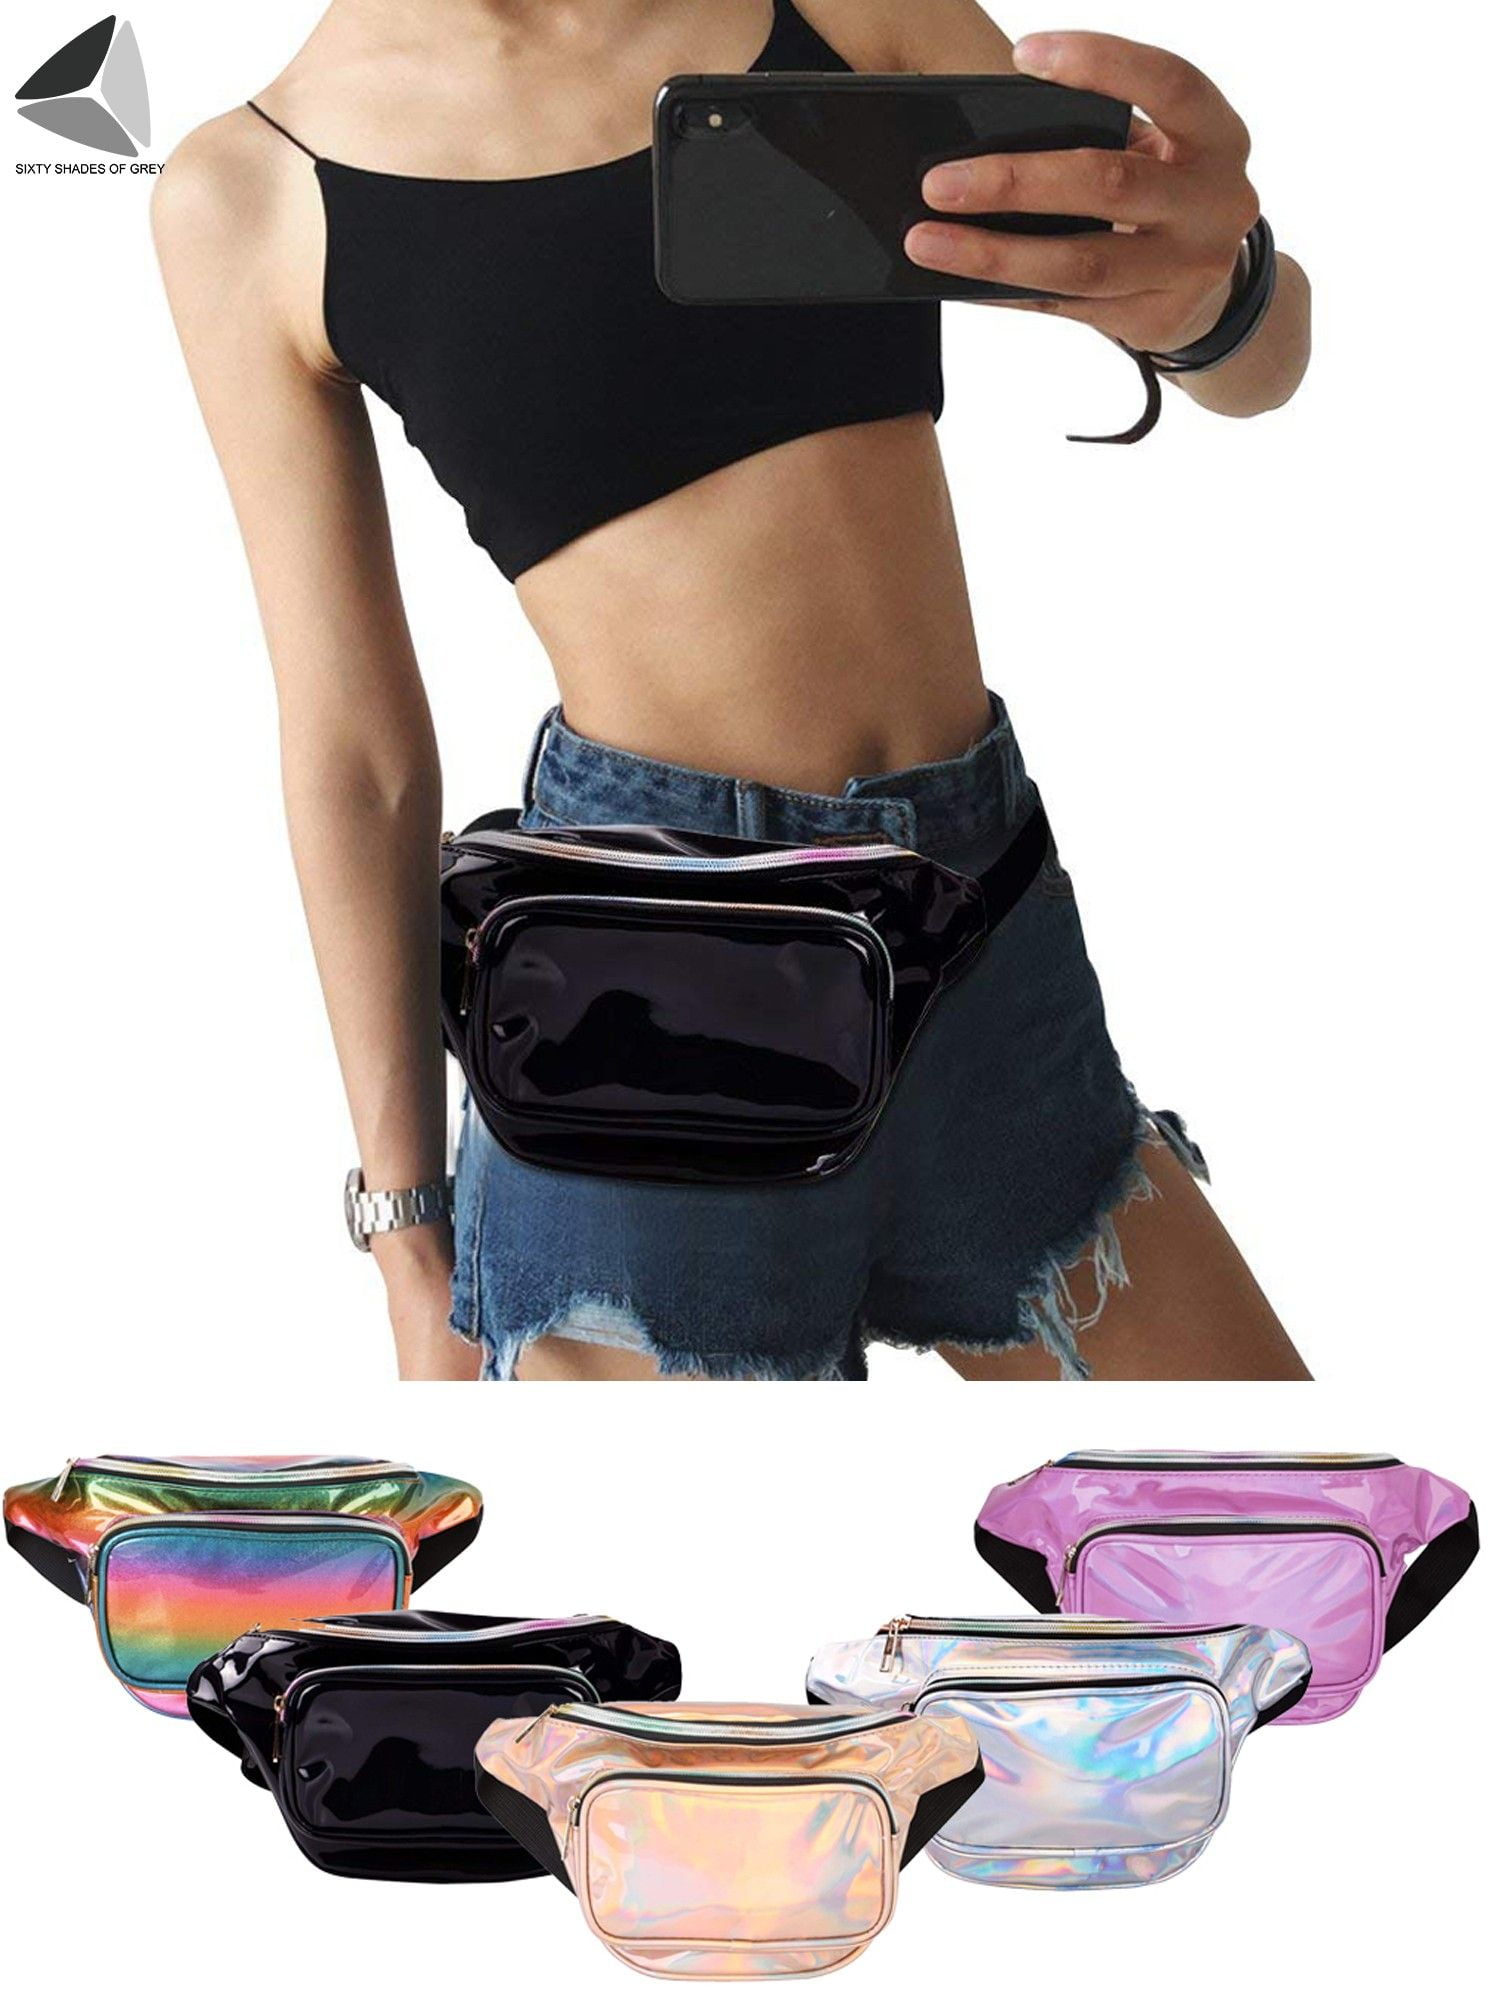 Grid Fashion Waterproof Sport Waist Packs with Pouches and Adjustable Belt for Women Men Kids for Travel Party Festival Running Hiking U-Black & Silver IOUALEY 2 Pack Shiny Holographic Fanny Packs 